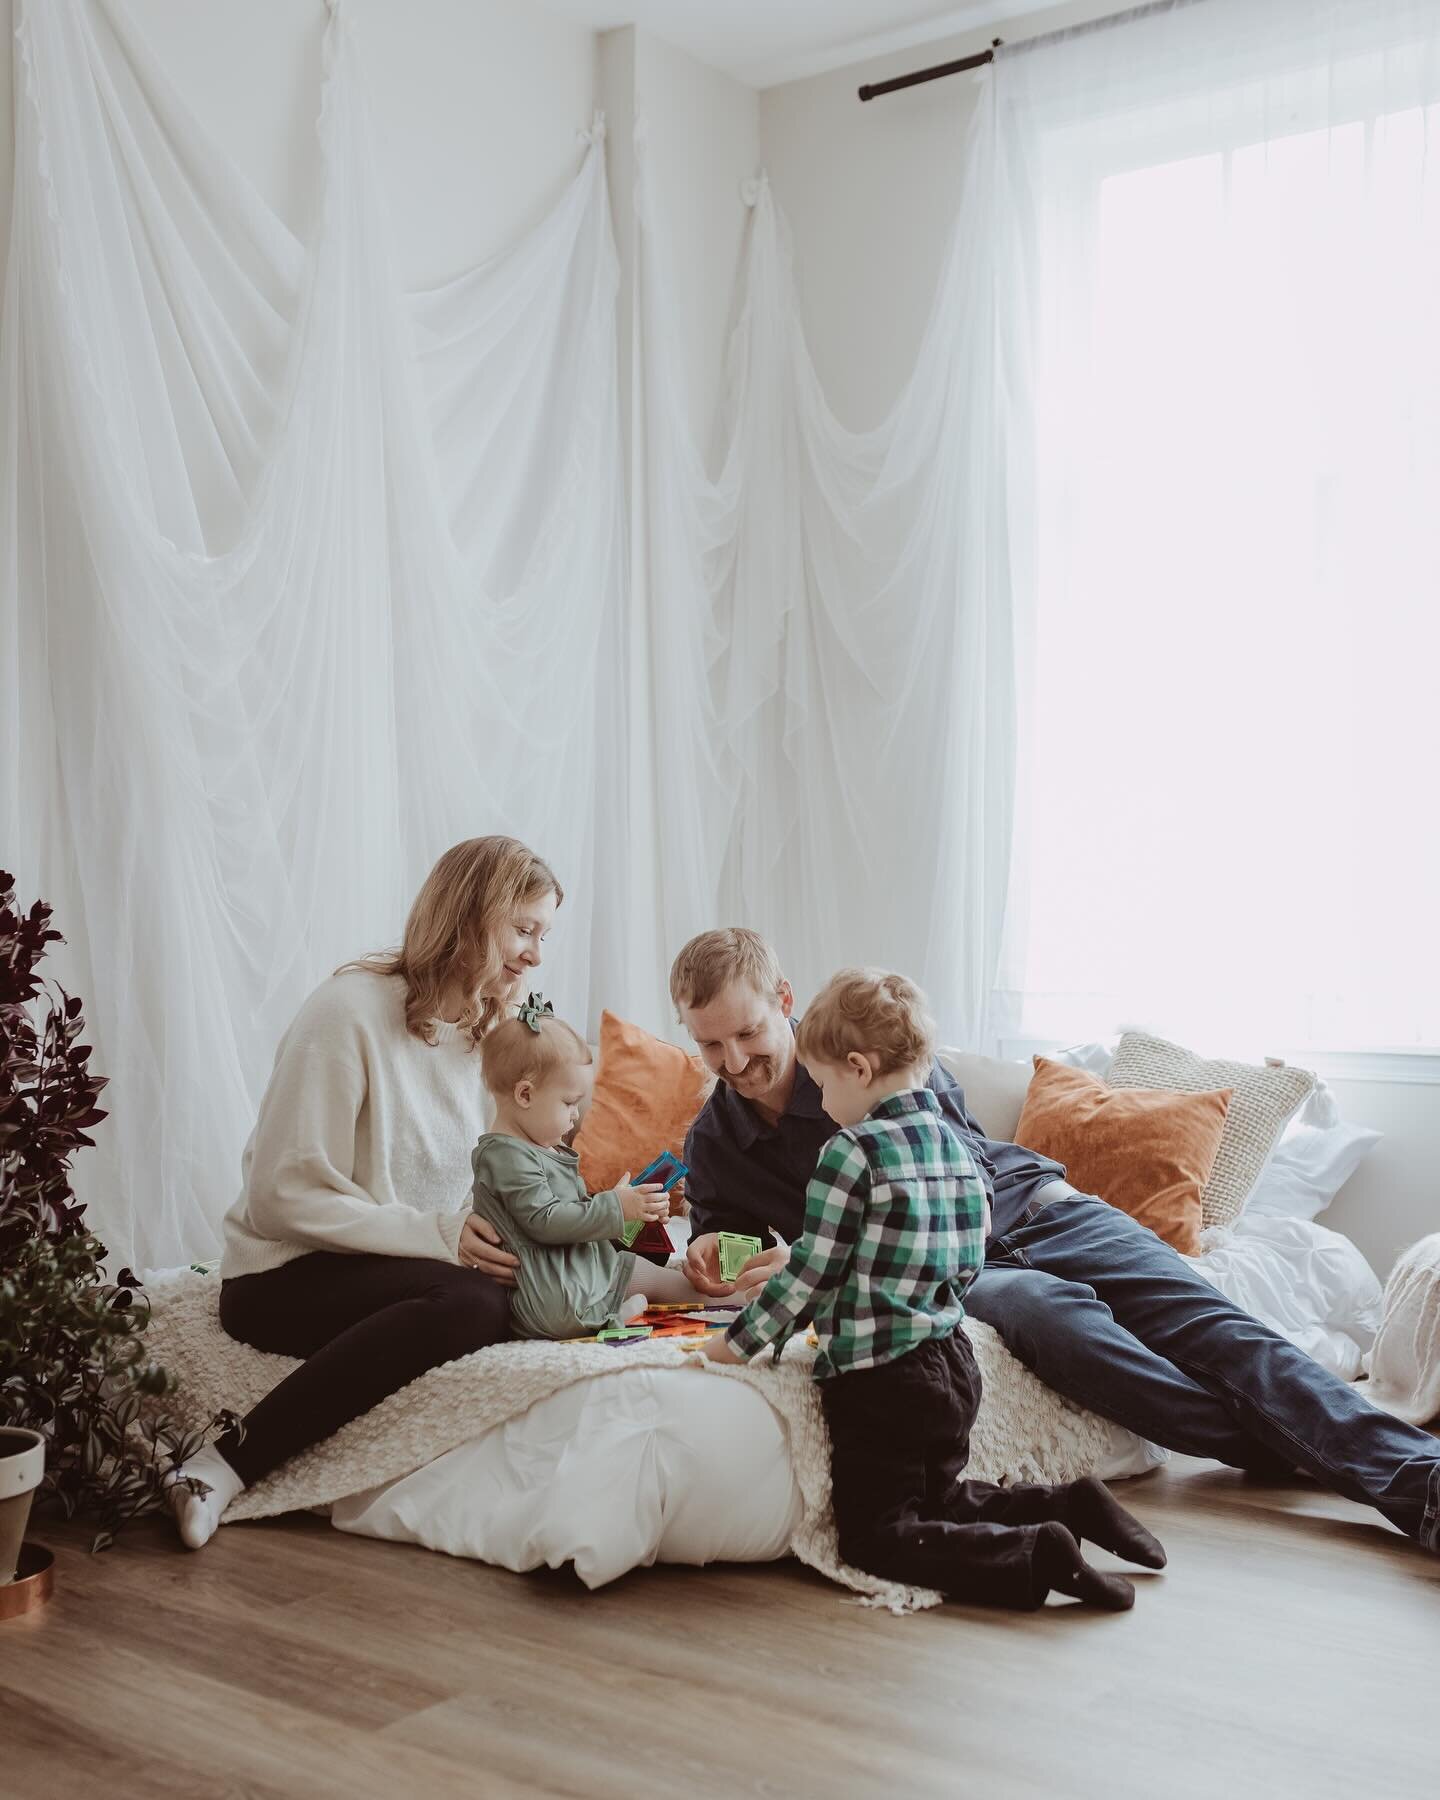 Time really does fly and our kids grow up in the blink of an eye. So, why not freeze those precious moments in time? 🕰️ Today, I&rsquo;m sharing a little secret to getting those genuine smiles and candid moments during family shoots - bring their fa